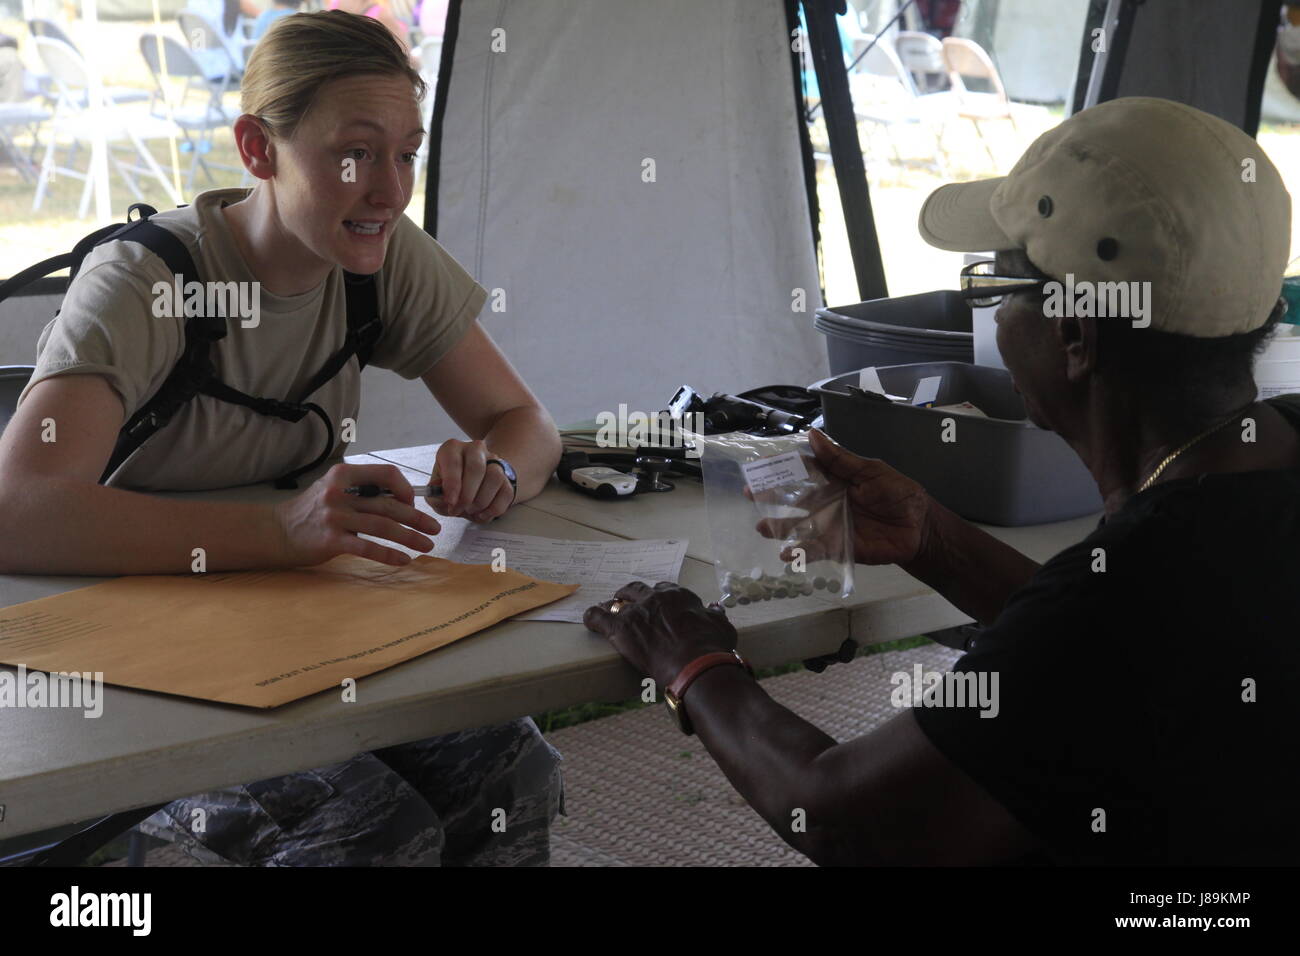 U.S. Air Force Capt. Glynnis Knobloch, with the 96th Medical Support Group from Eglin Air Force Base, Florida, prescribes medicine to a patient at a medical readiness event in Dangriga, Belize, May 22, 2017. This is the third and final medical event scheduled for Beyond the Horizon 2017, a U.S. Southern Command-sponsored, Army South-led exercise designed to provide humanitarian and engineering services to communities in need, demonstrating U.S. support for Belize. (U.S. Army photo by Spc. Kelson Brooks) (RELEASED) Stock Photo